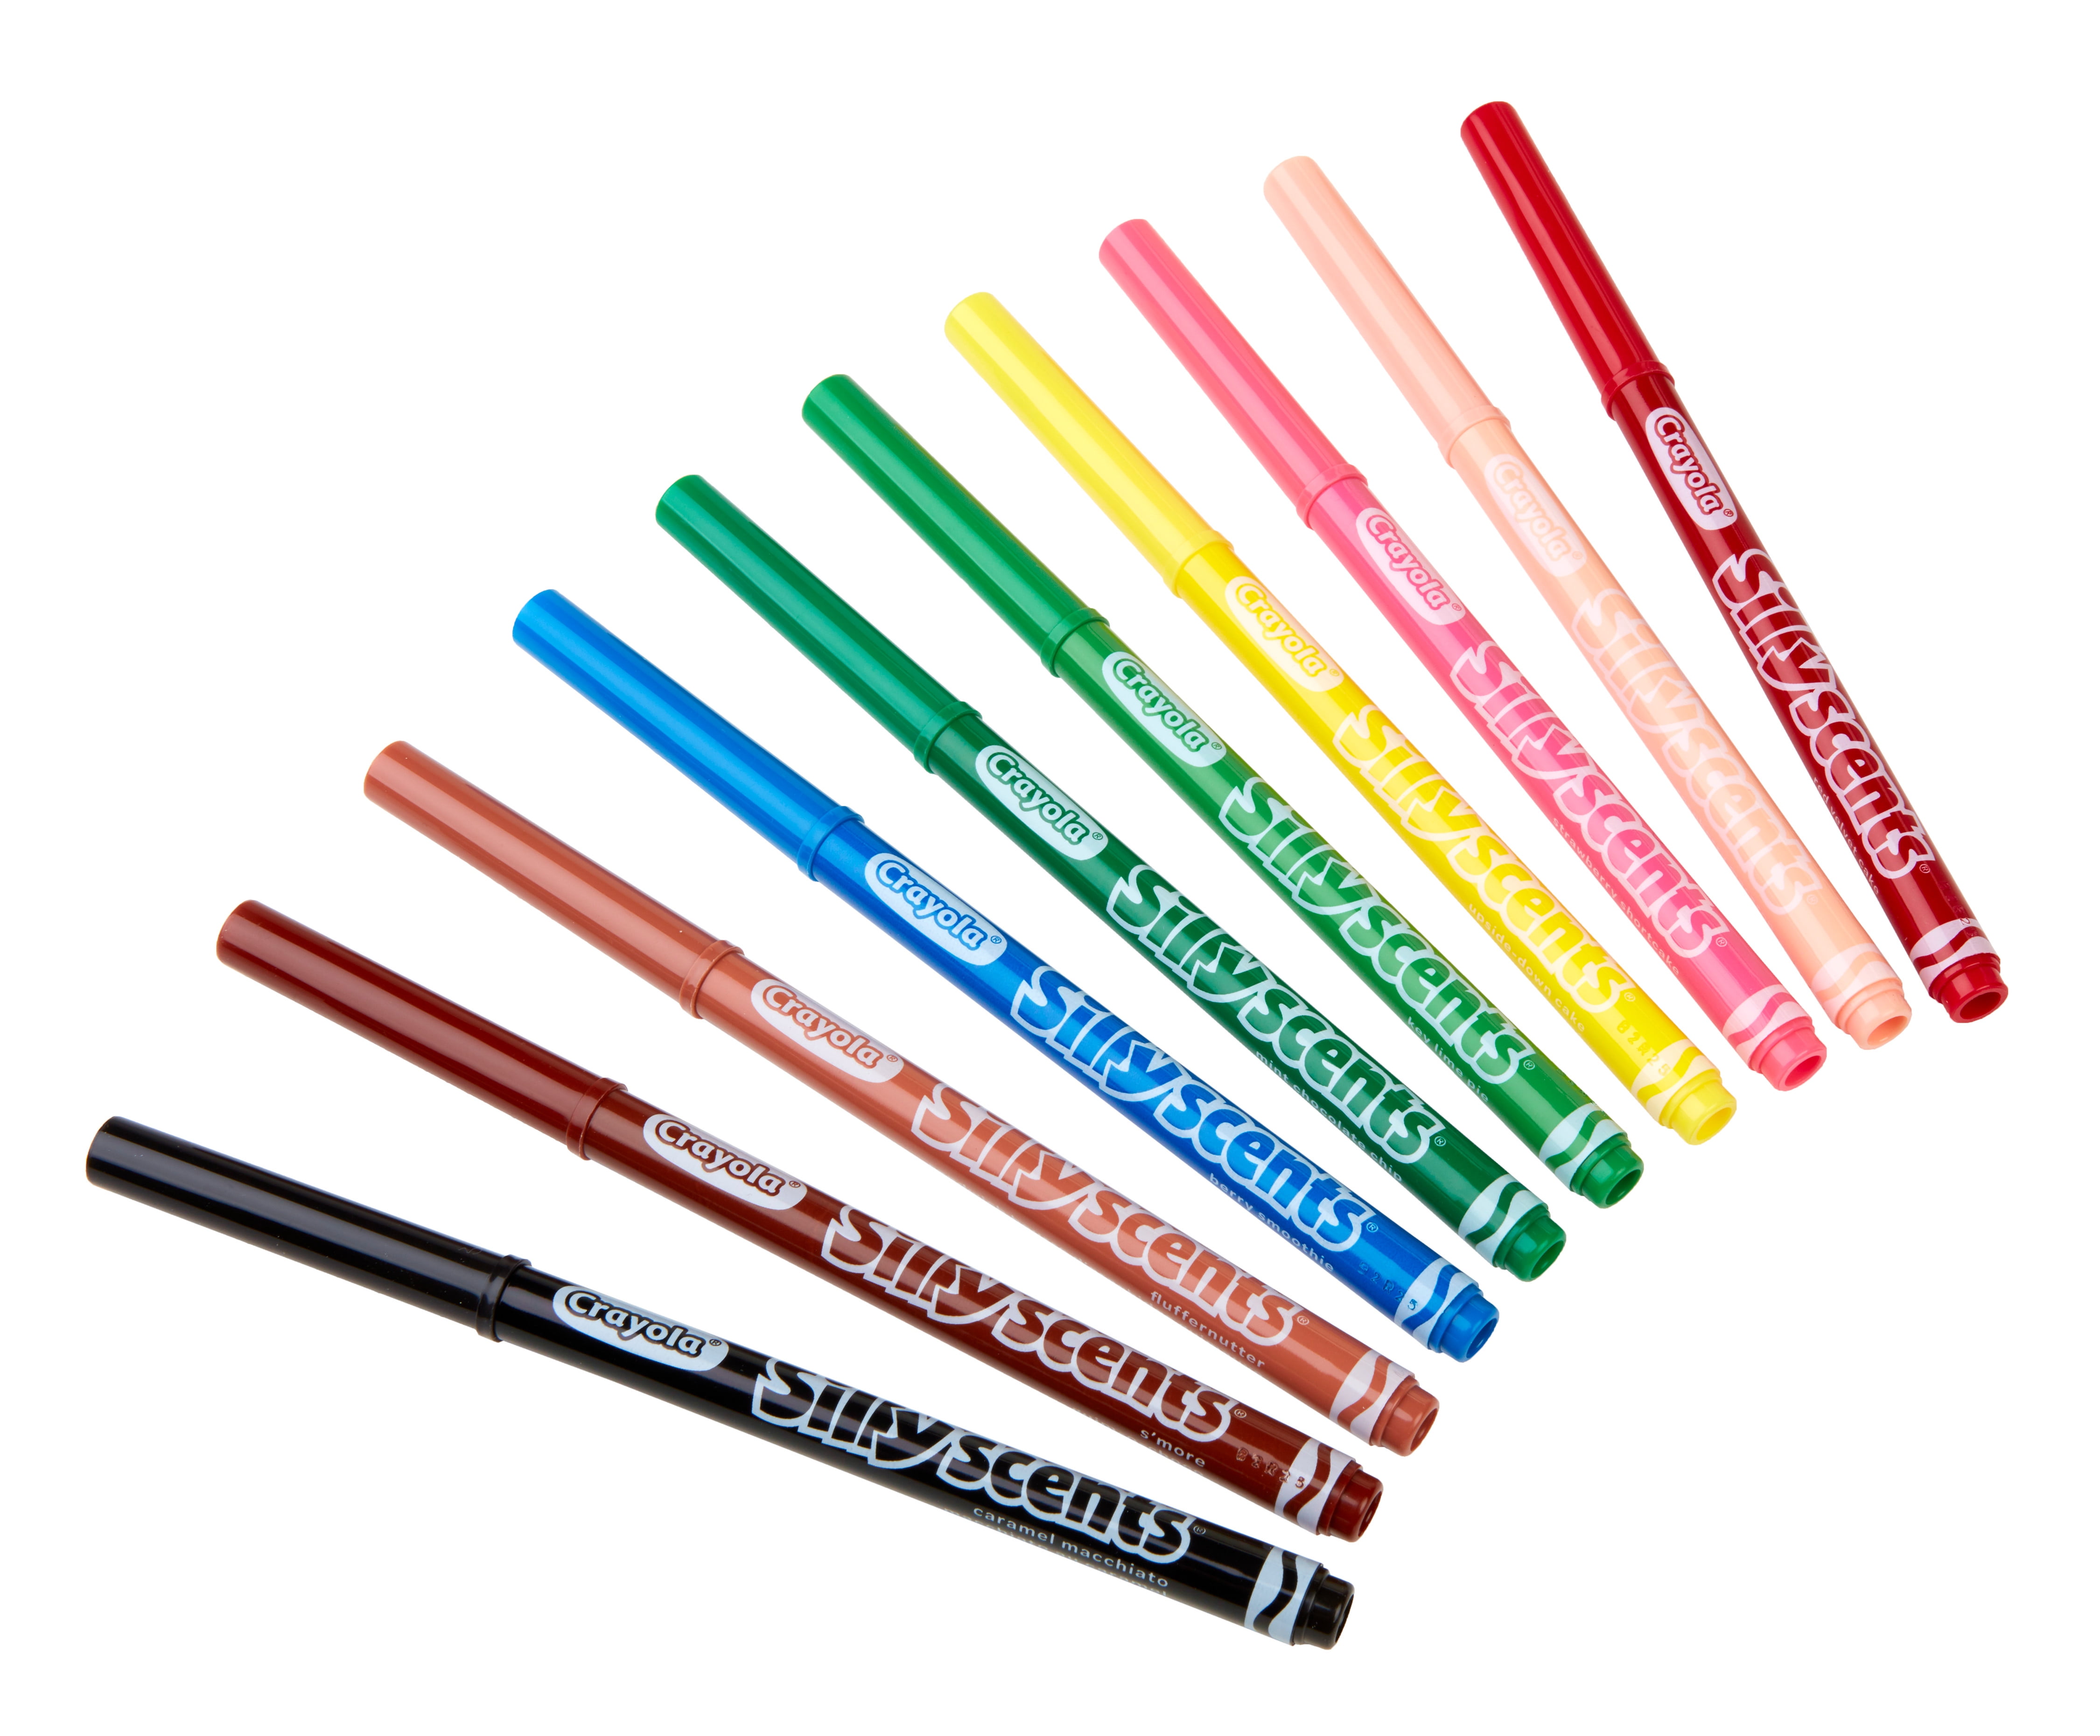 Crayola® Silly Scents™ Washable Chisel Tip Markers, 12ct.